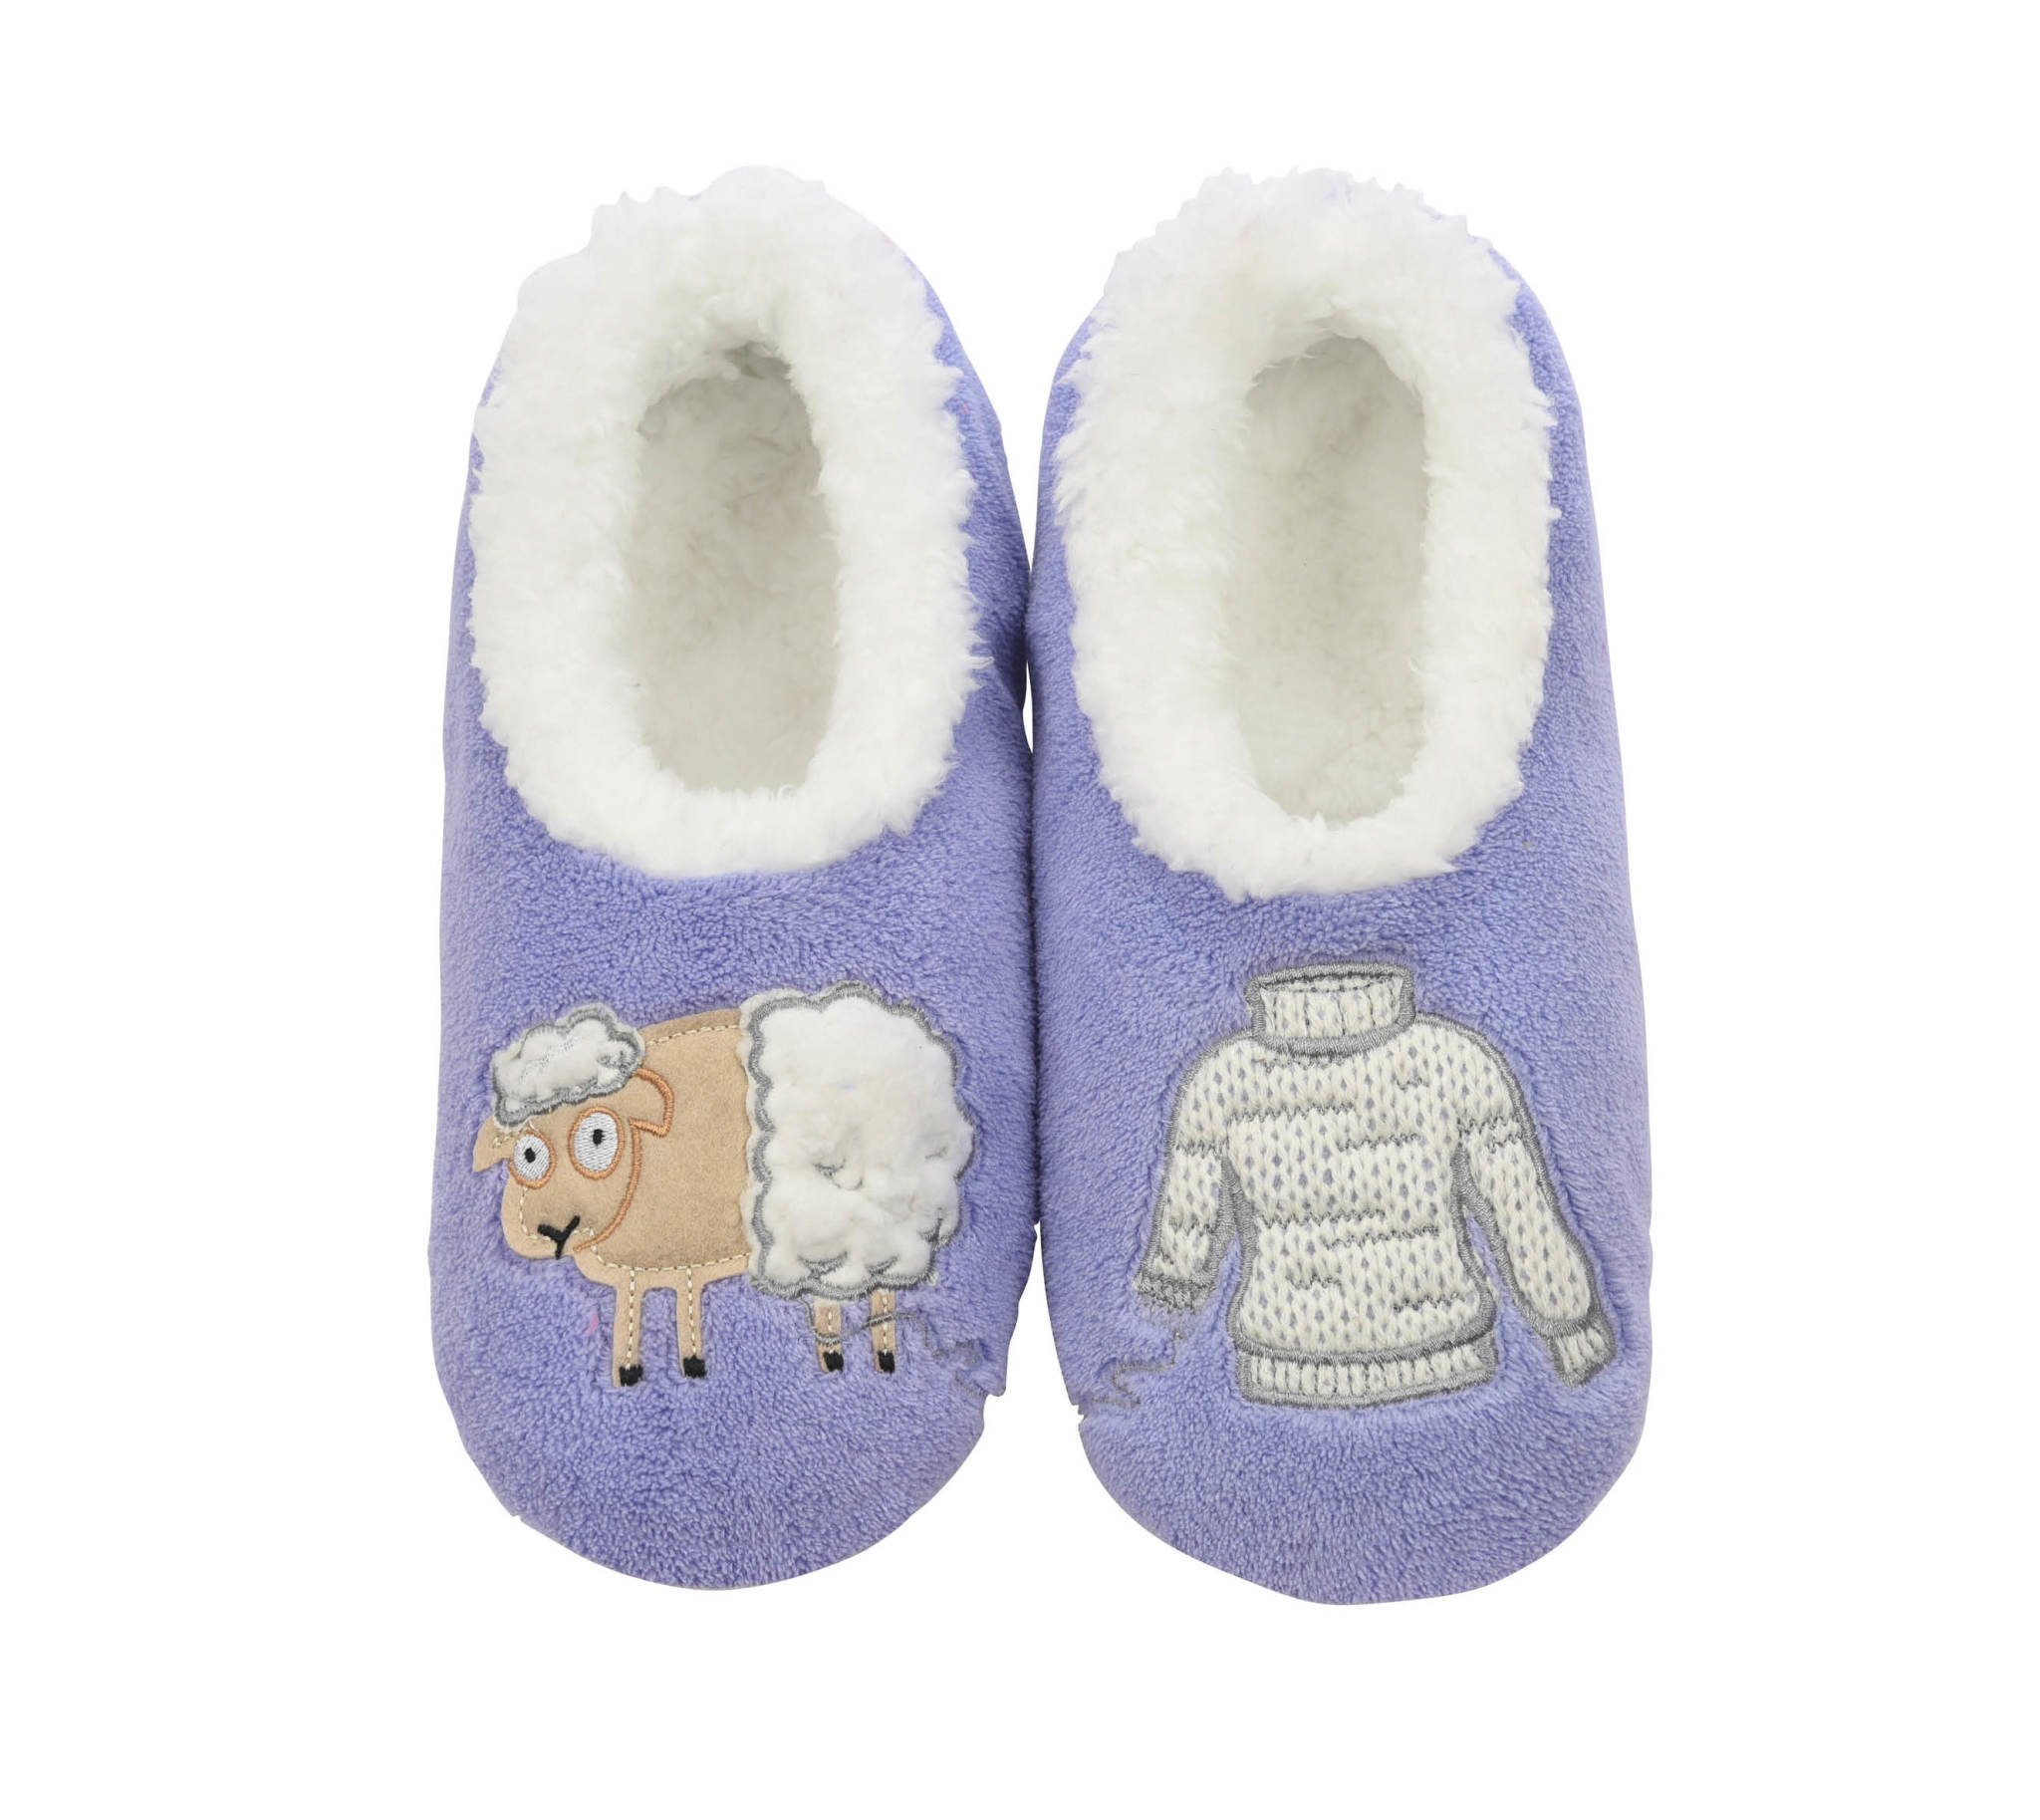 snoozies slippers womens